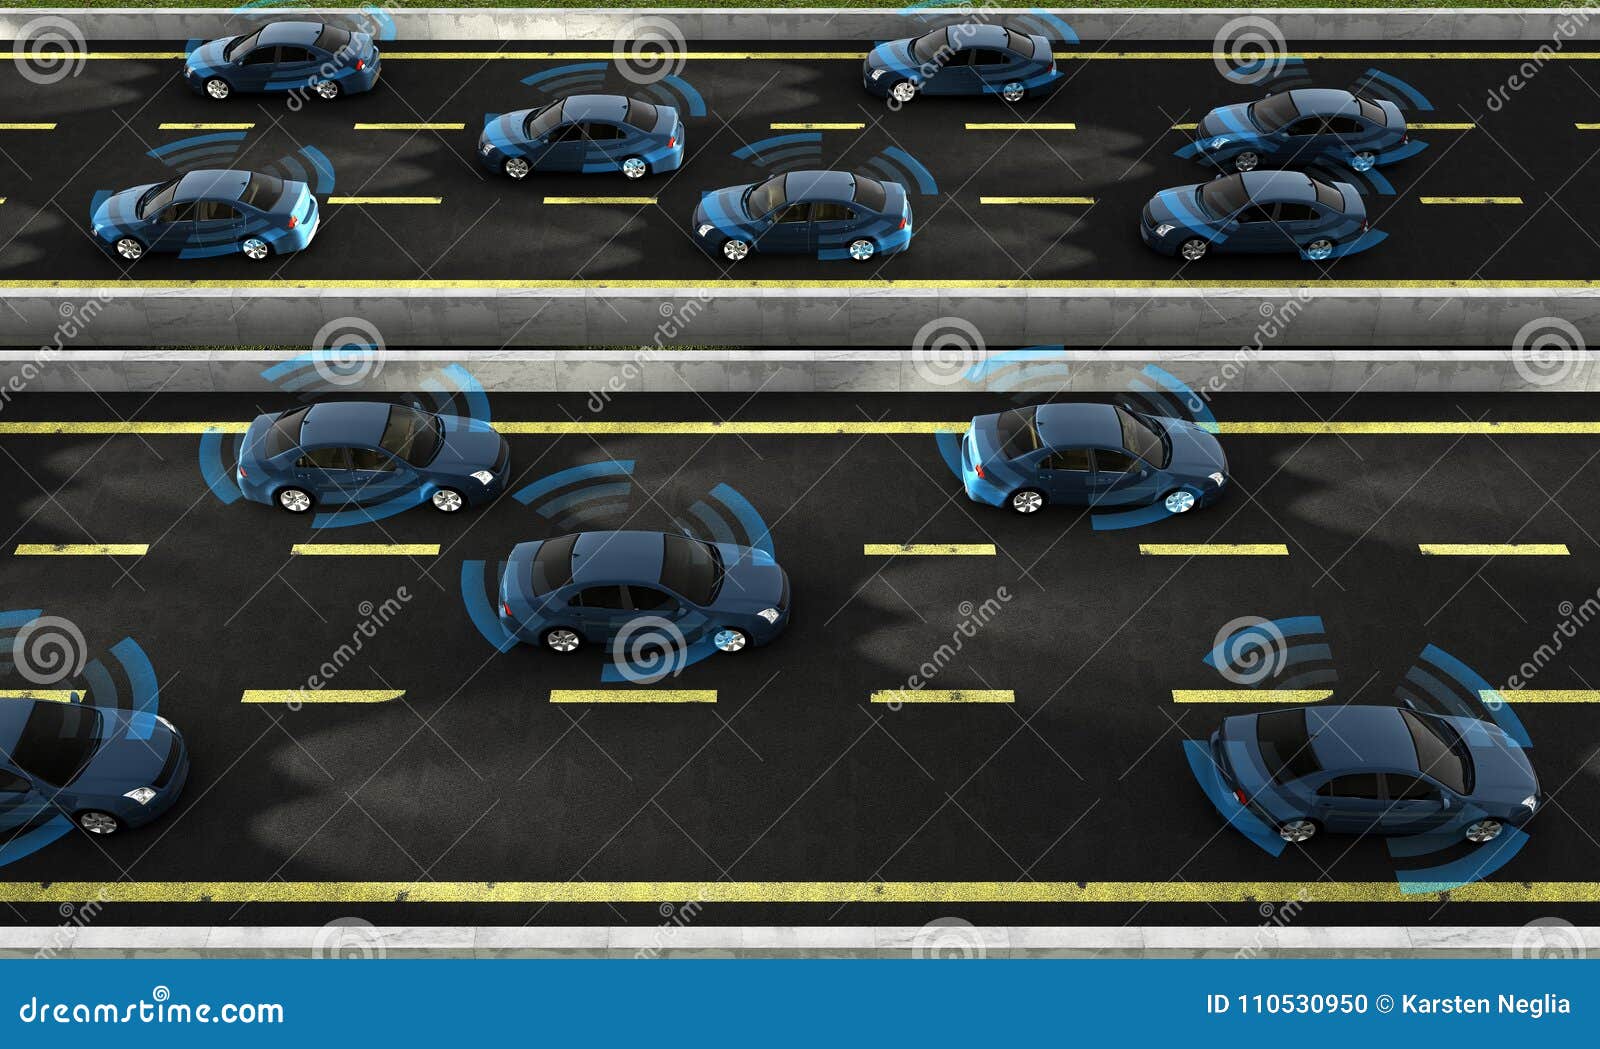 autonomous cars on a road with visible connection